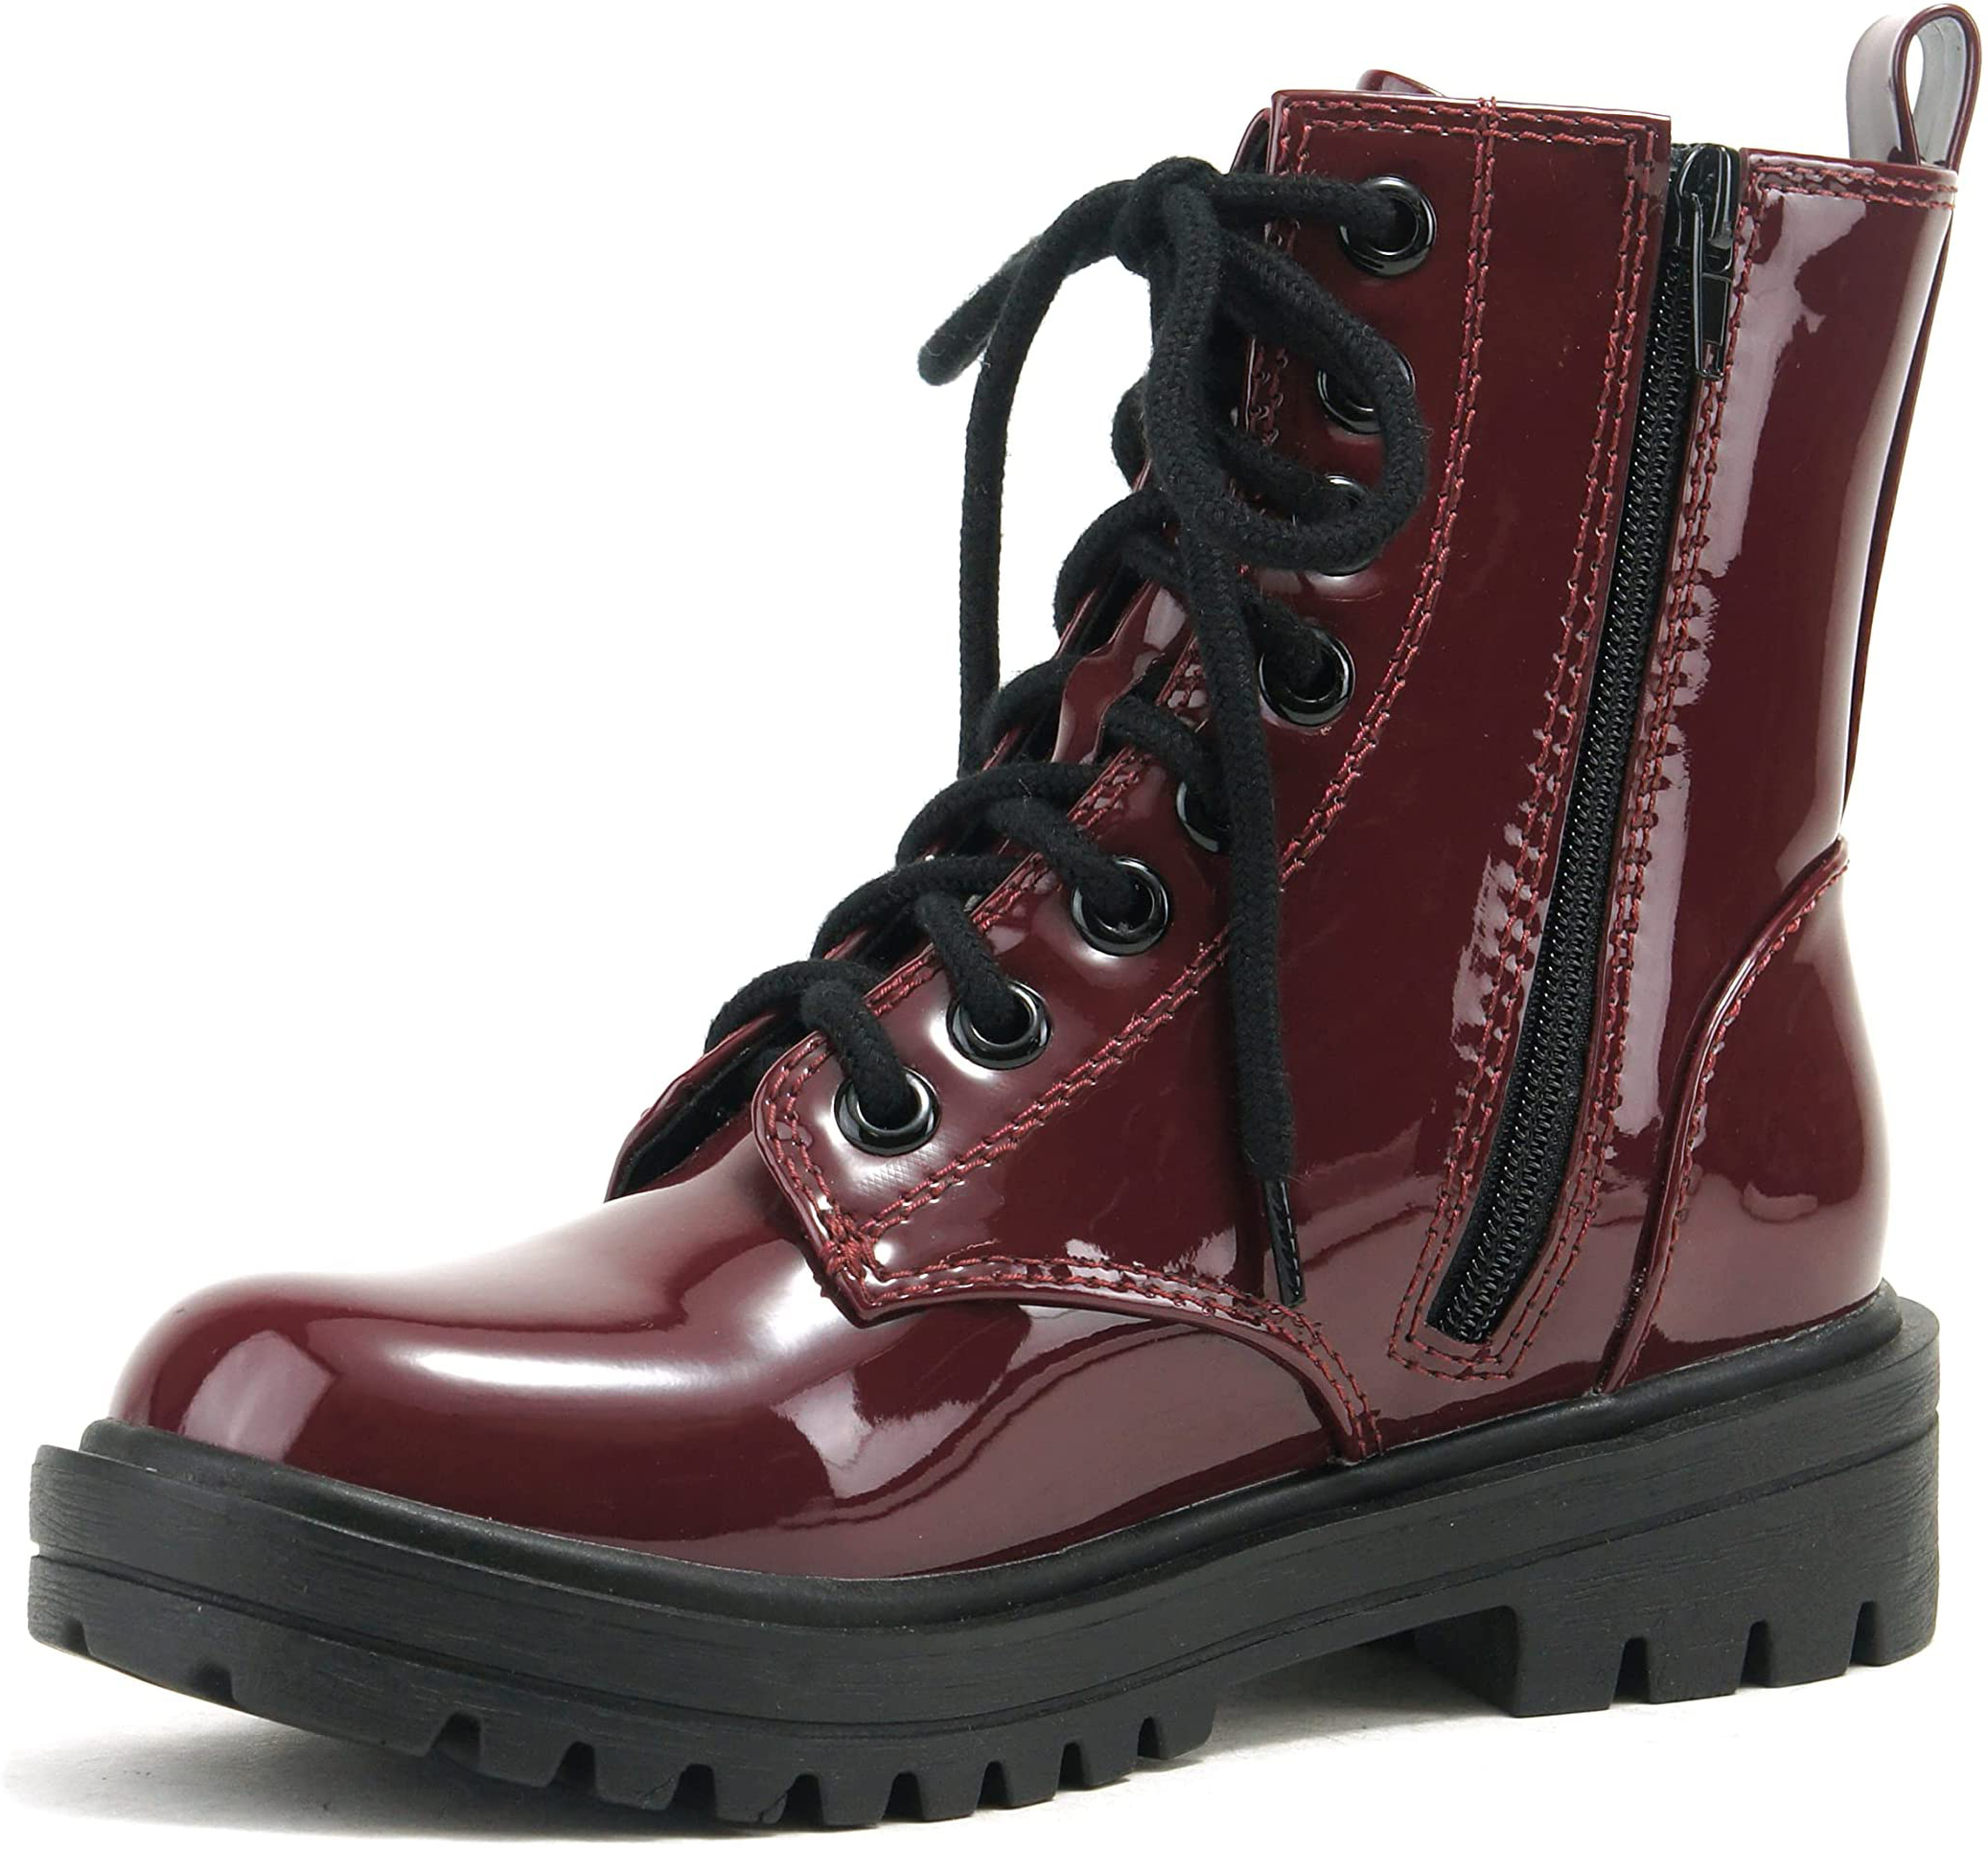 Soda Women Combat Army Military Motorcycle Riding Platform Lug Boots Side Zipper FIRM-S Vino Wine Burgundy Patent 10 - image 2 of 4